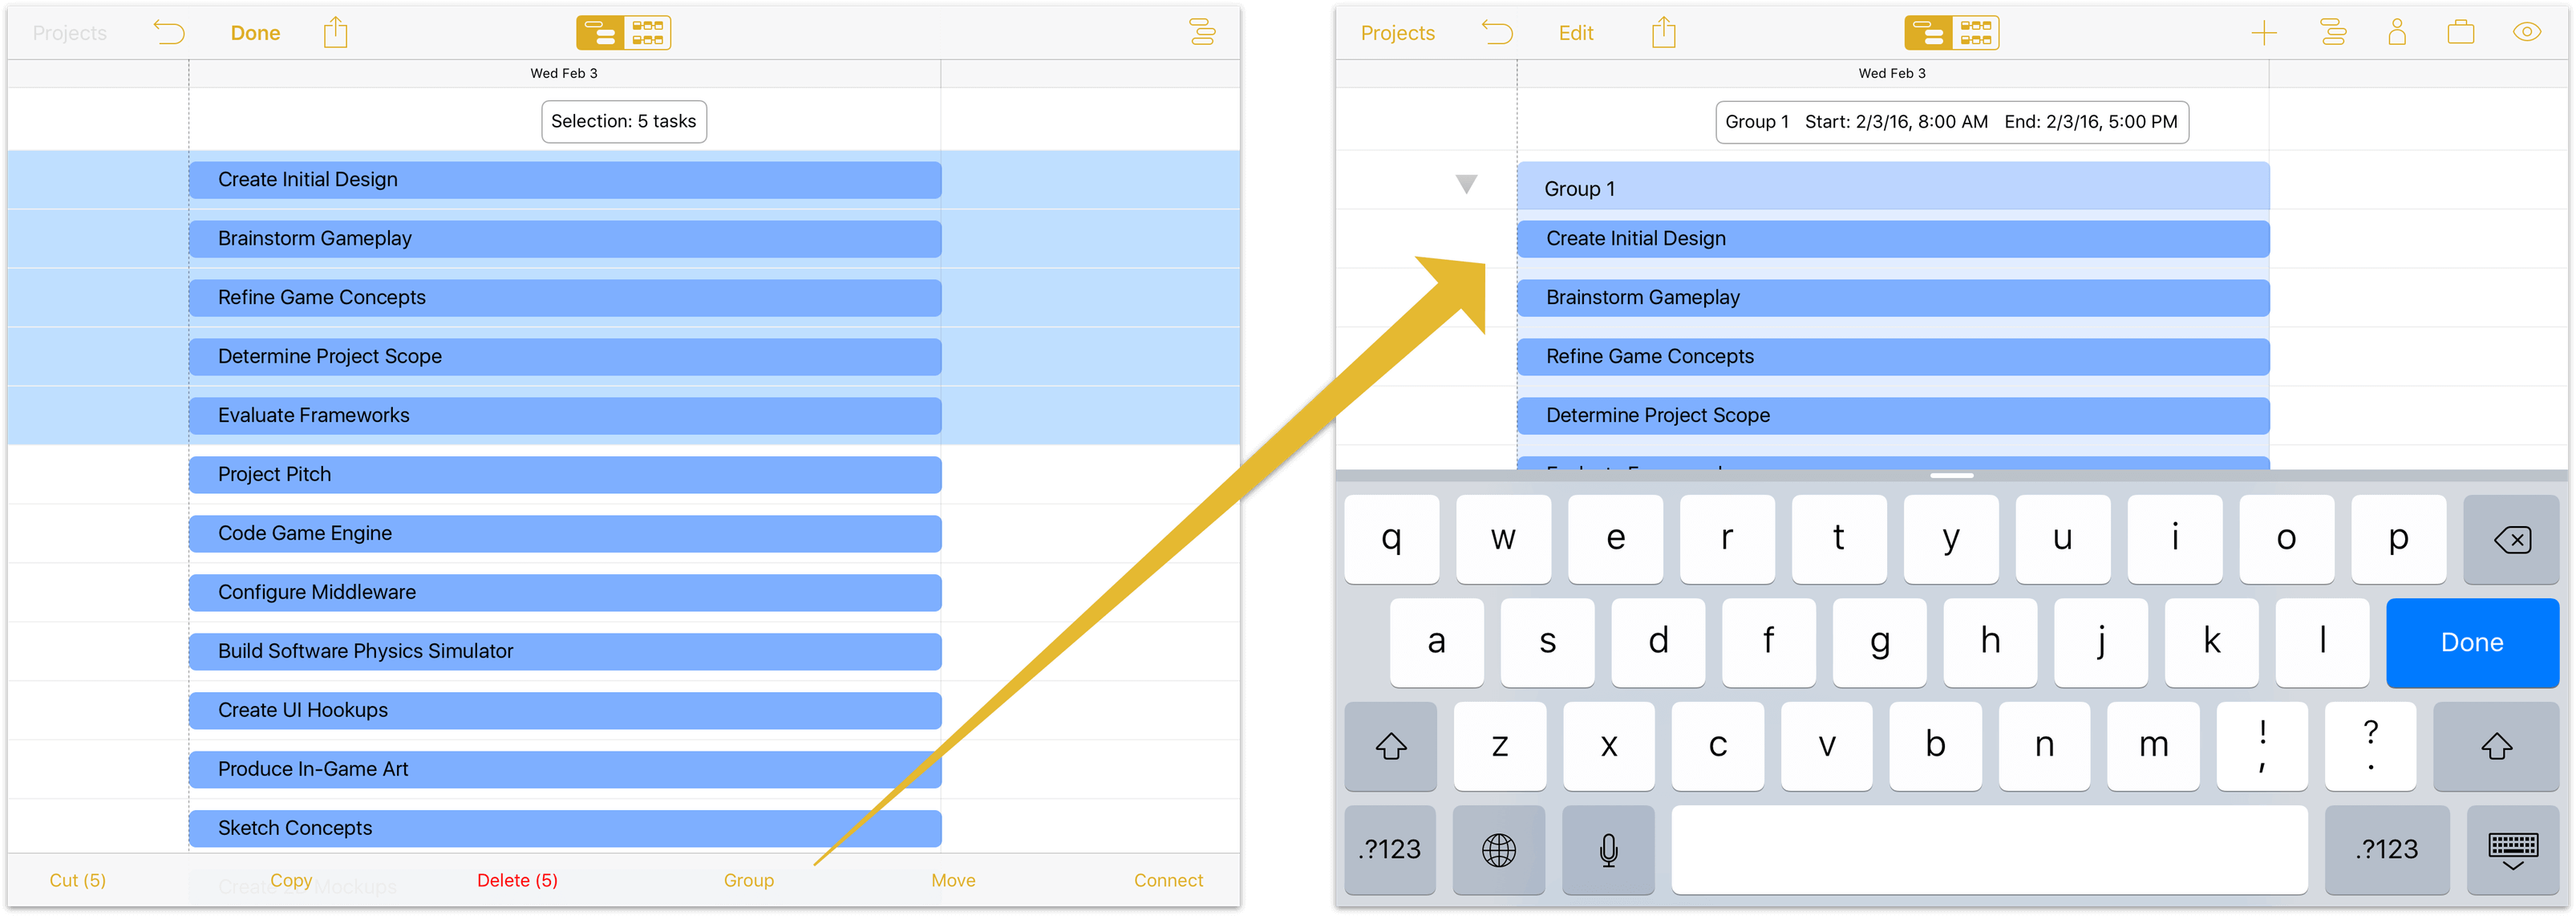 Selecting multiple tasks for grouping in Edit mode.